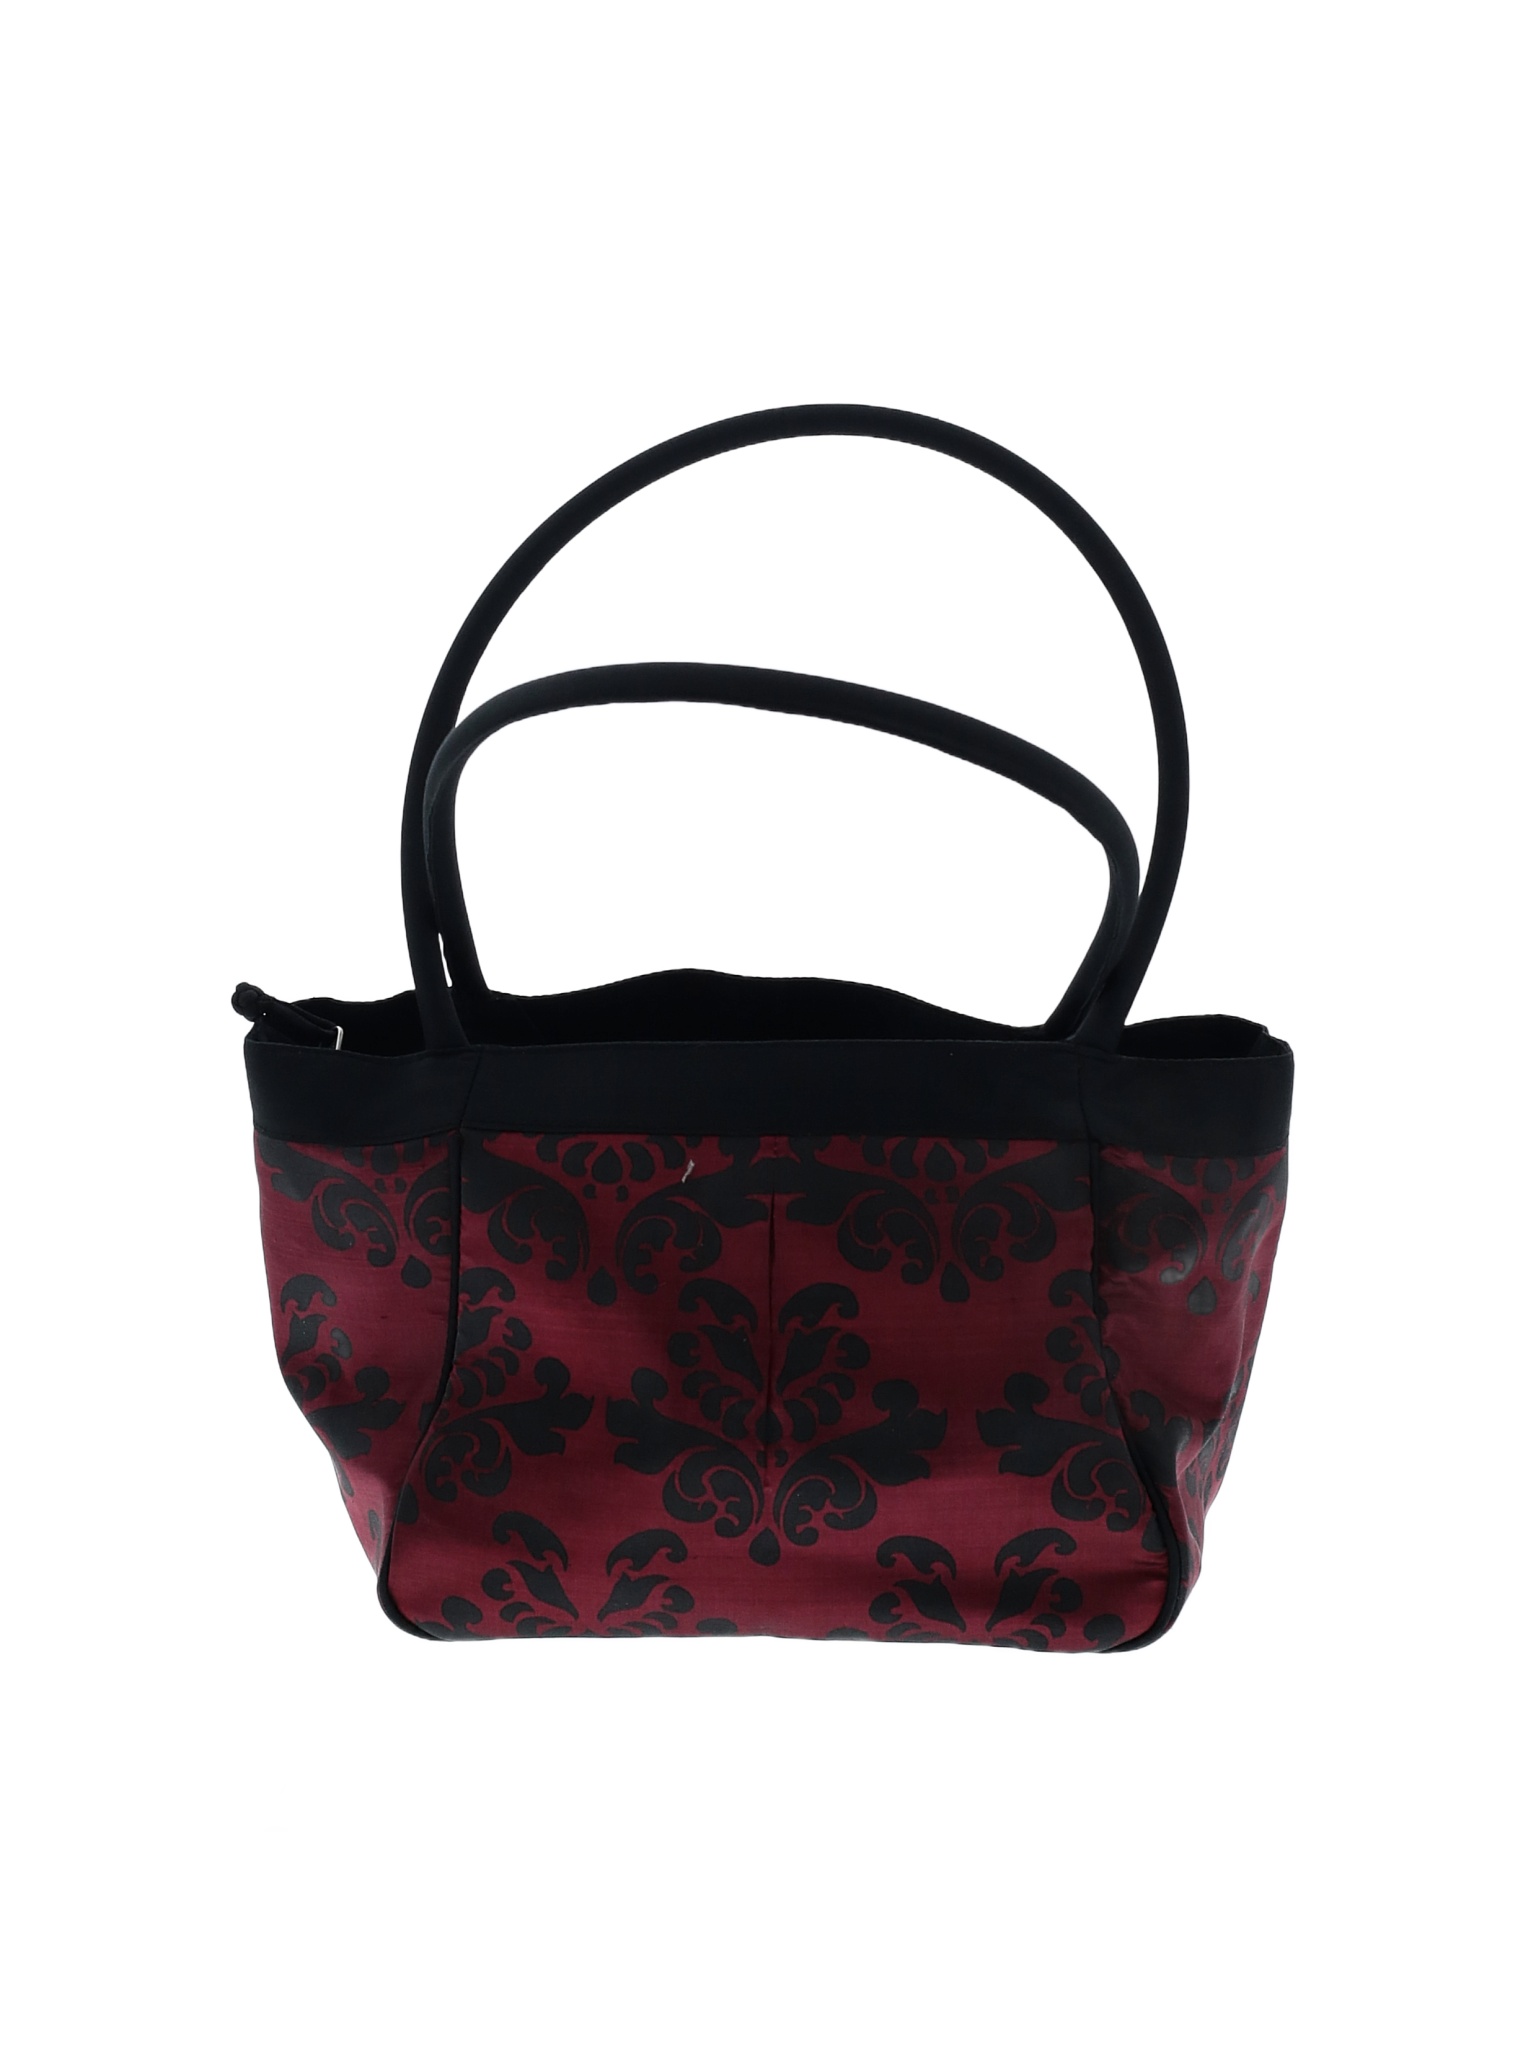 Clare V. Women's Handbags On Sale Up To 90% Off Retail